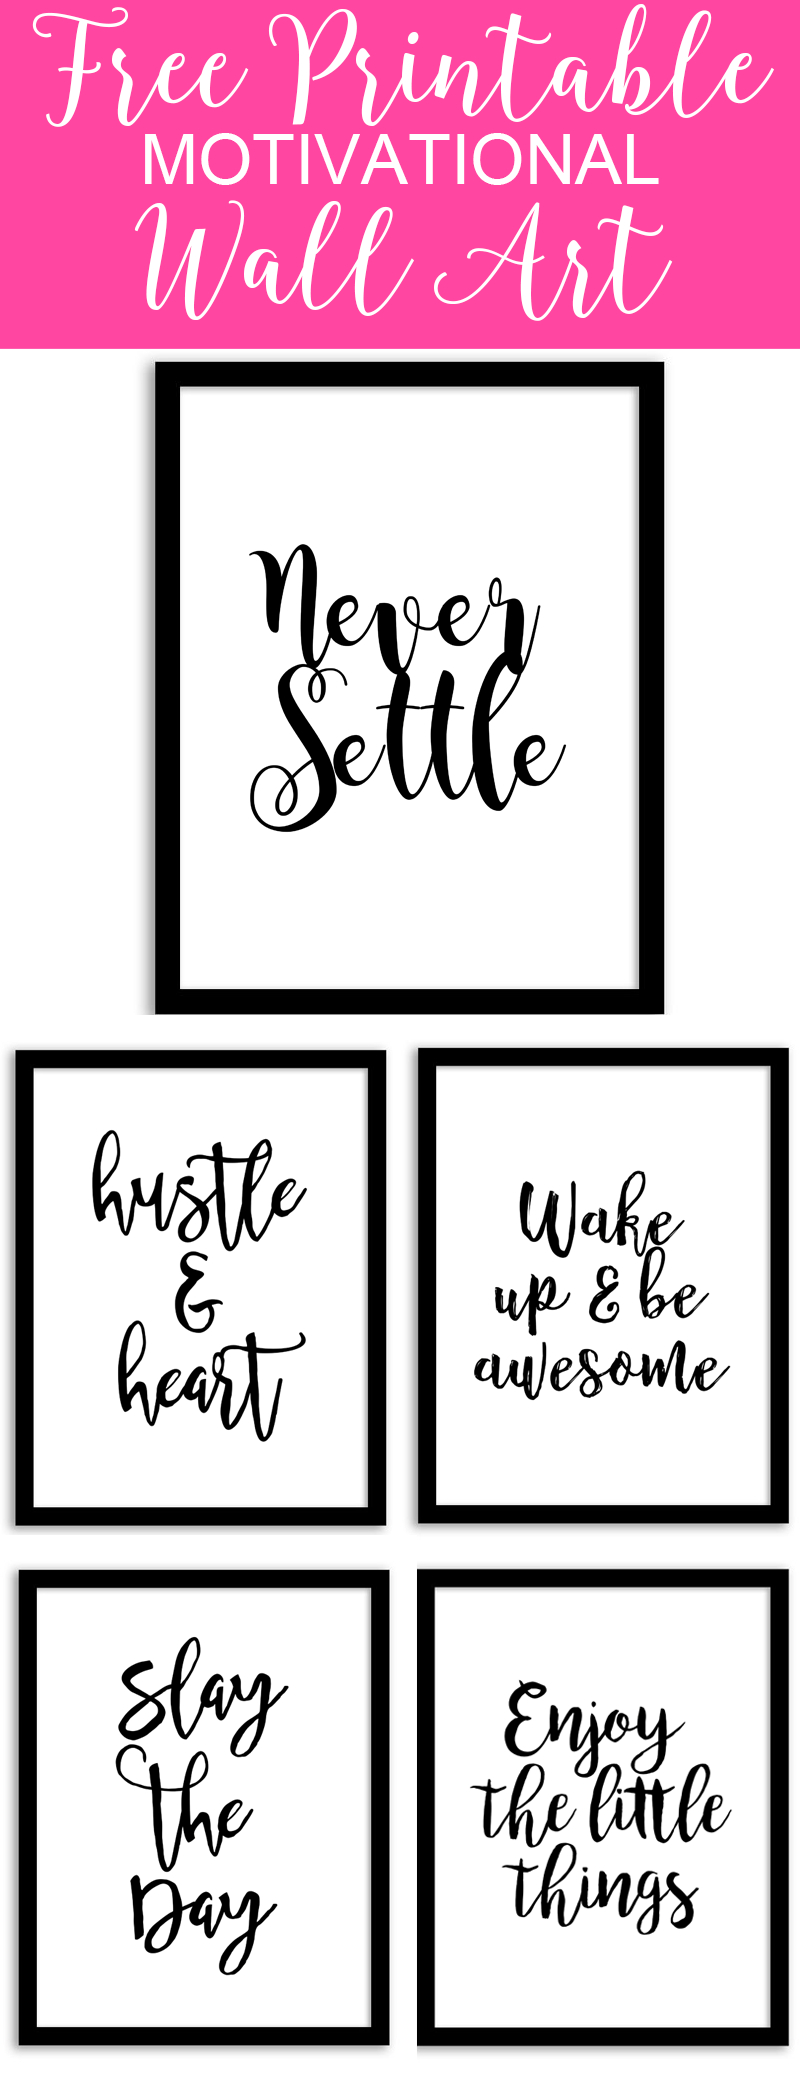 Free Printable Wall Art From @chicfetti - Perfect For Your Office Of - Free Printable Quotes For Office